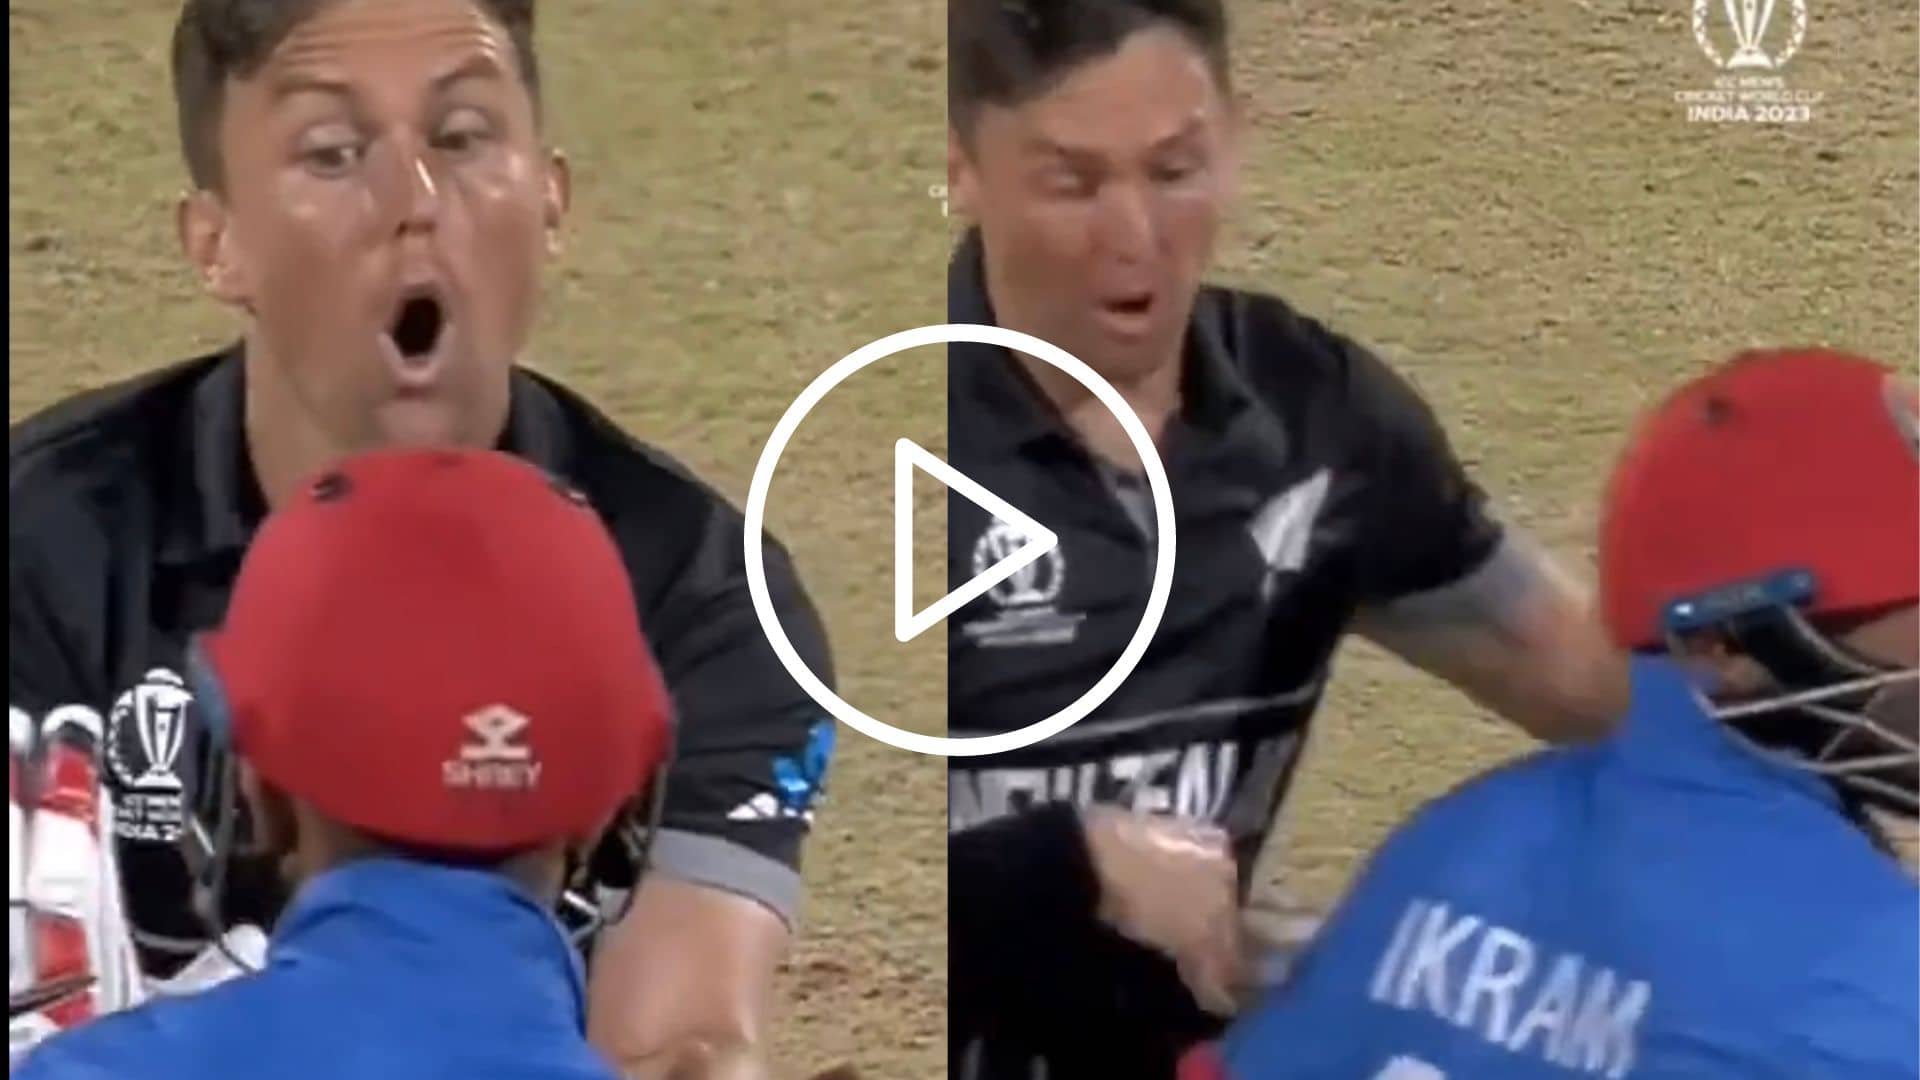 [Watch] Trent Boult Avoids Dangerous Collision With Afghanistan Batter In Intense WC Game